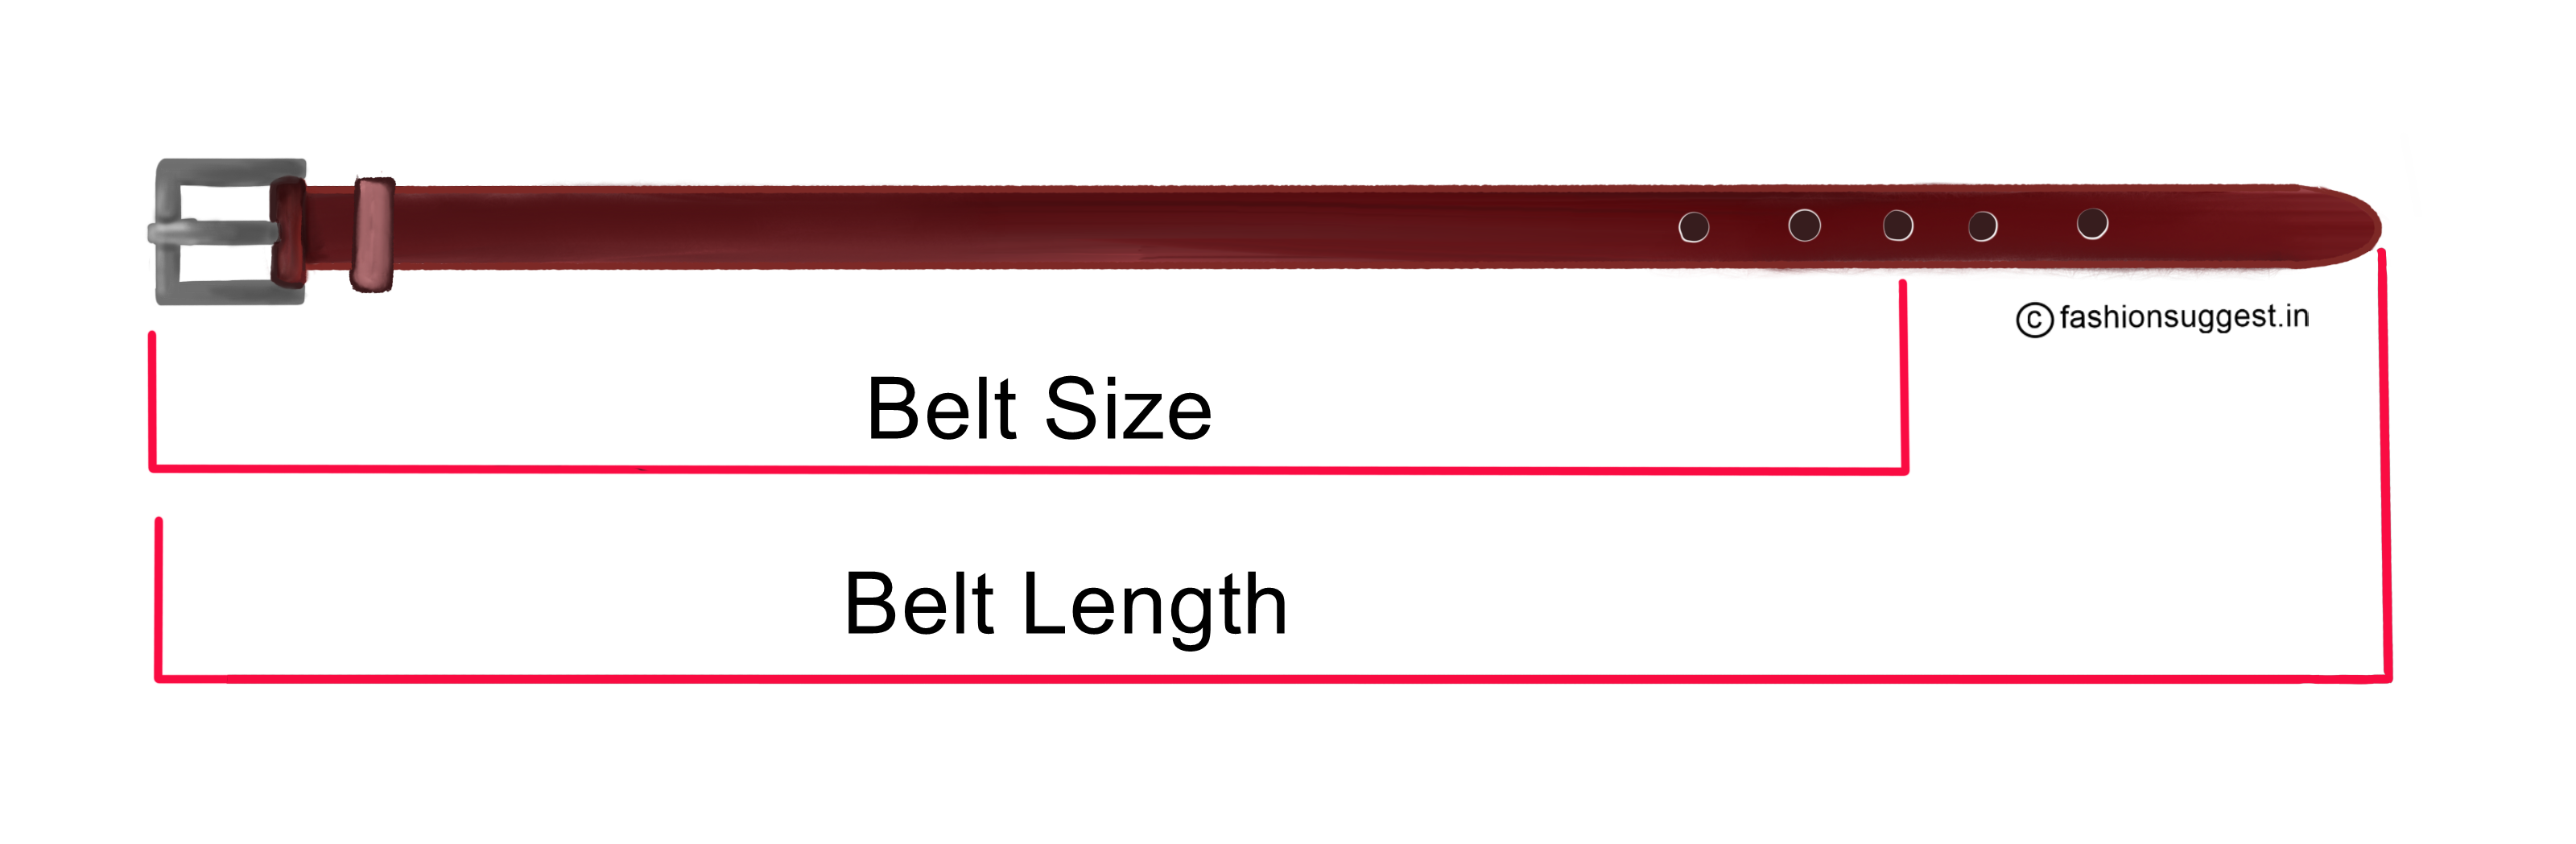 infographic for choosing belt size